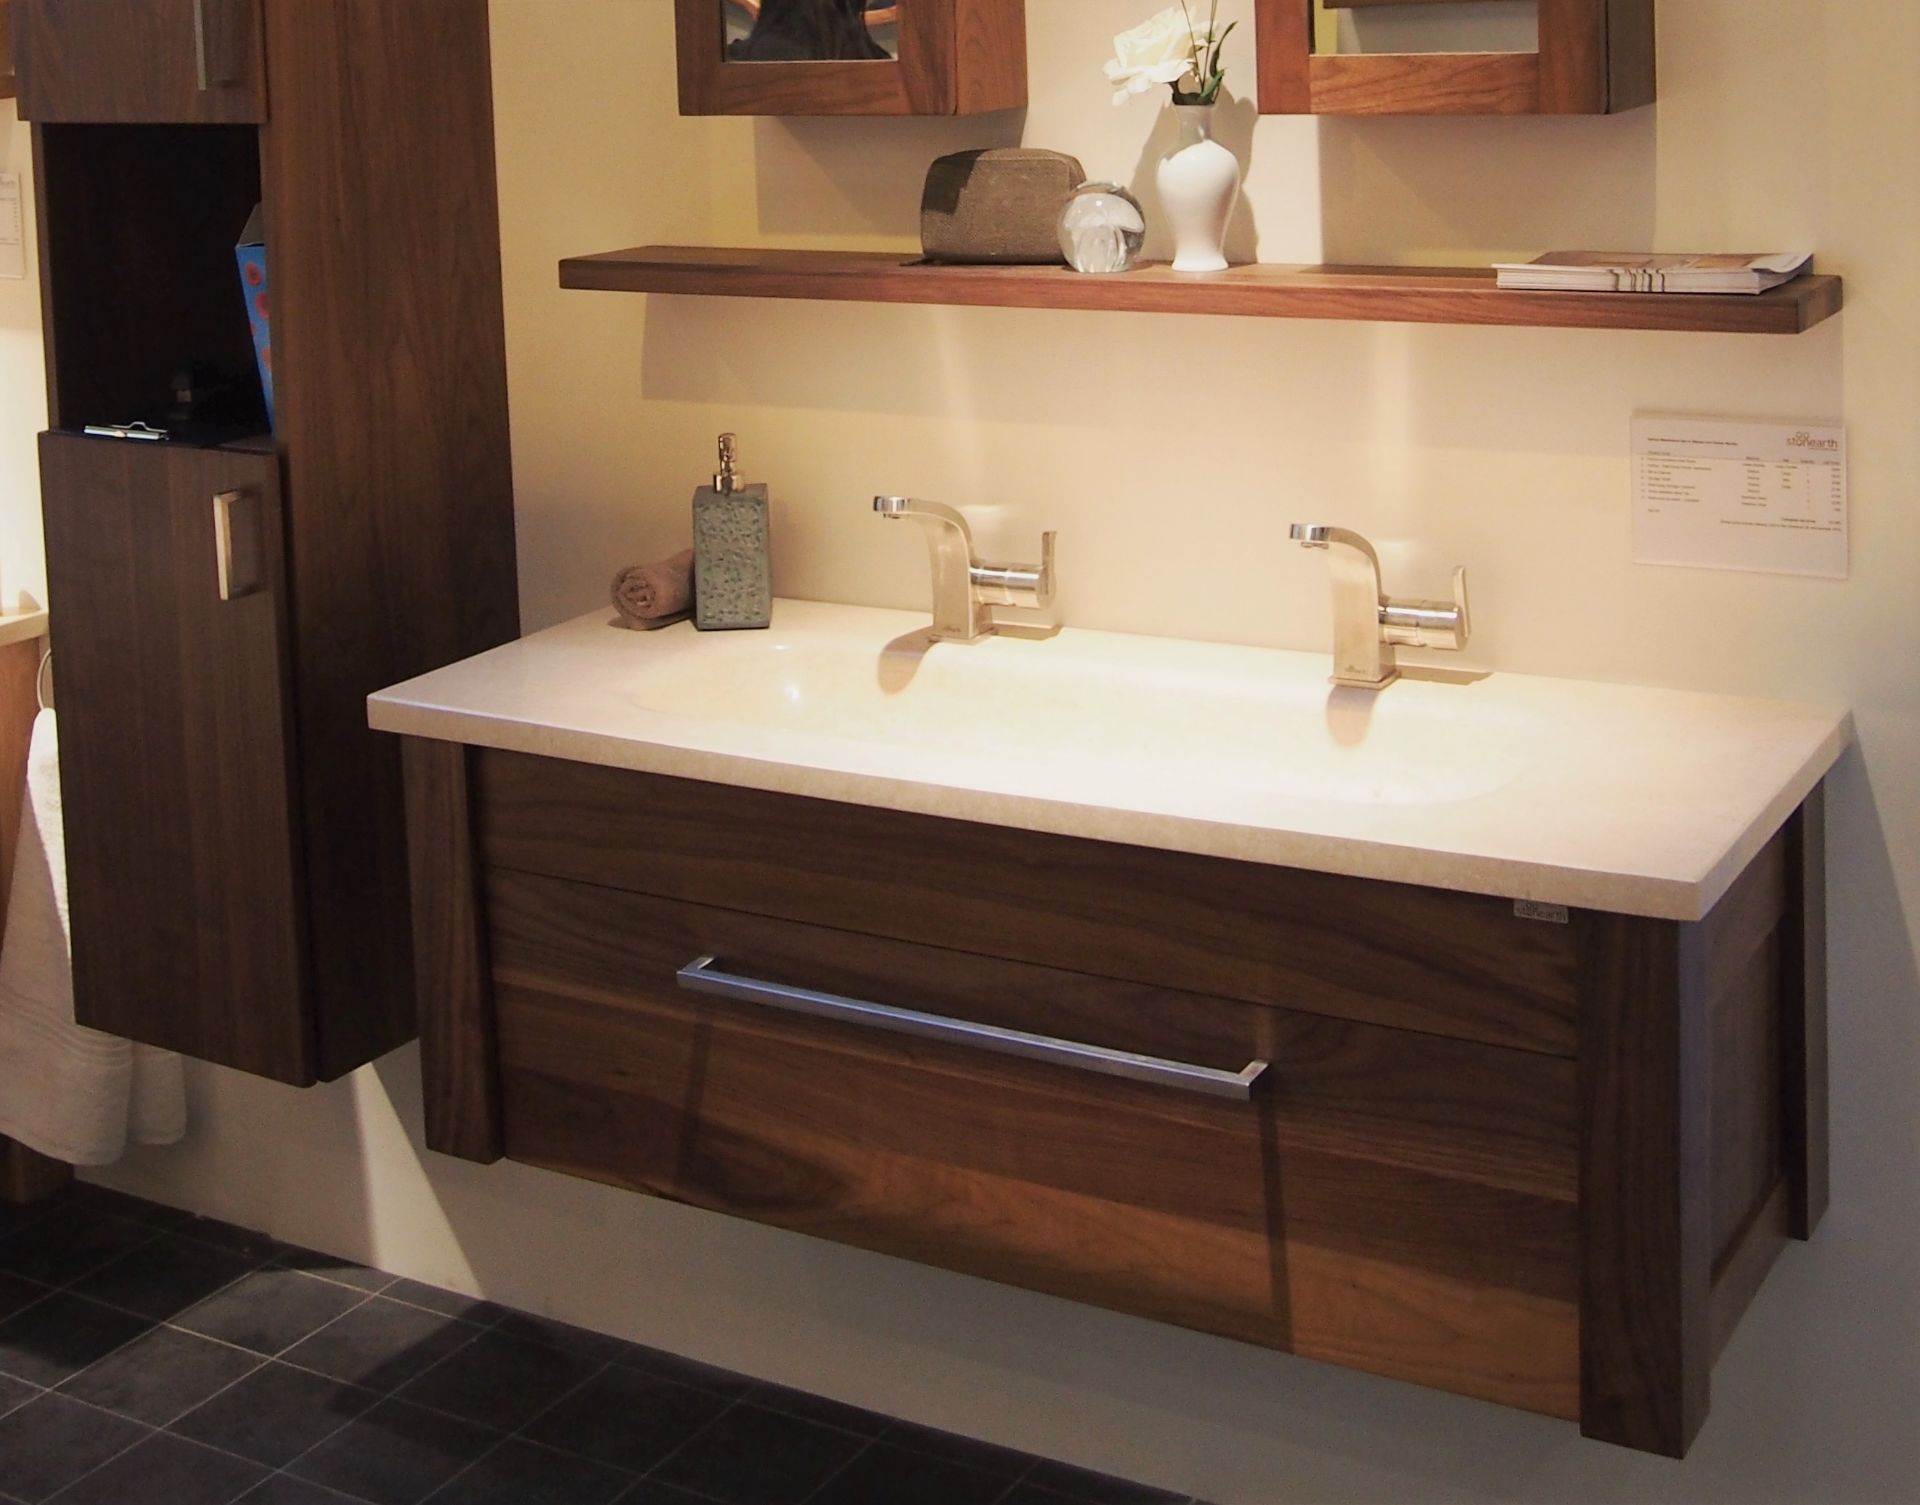 1 x Stonearth 'Venice' Wall Mounted 1200mm Washstand - American Solid Walnut - Original RRP £1,270 - Image 4 of 9